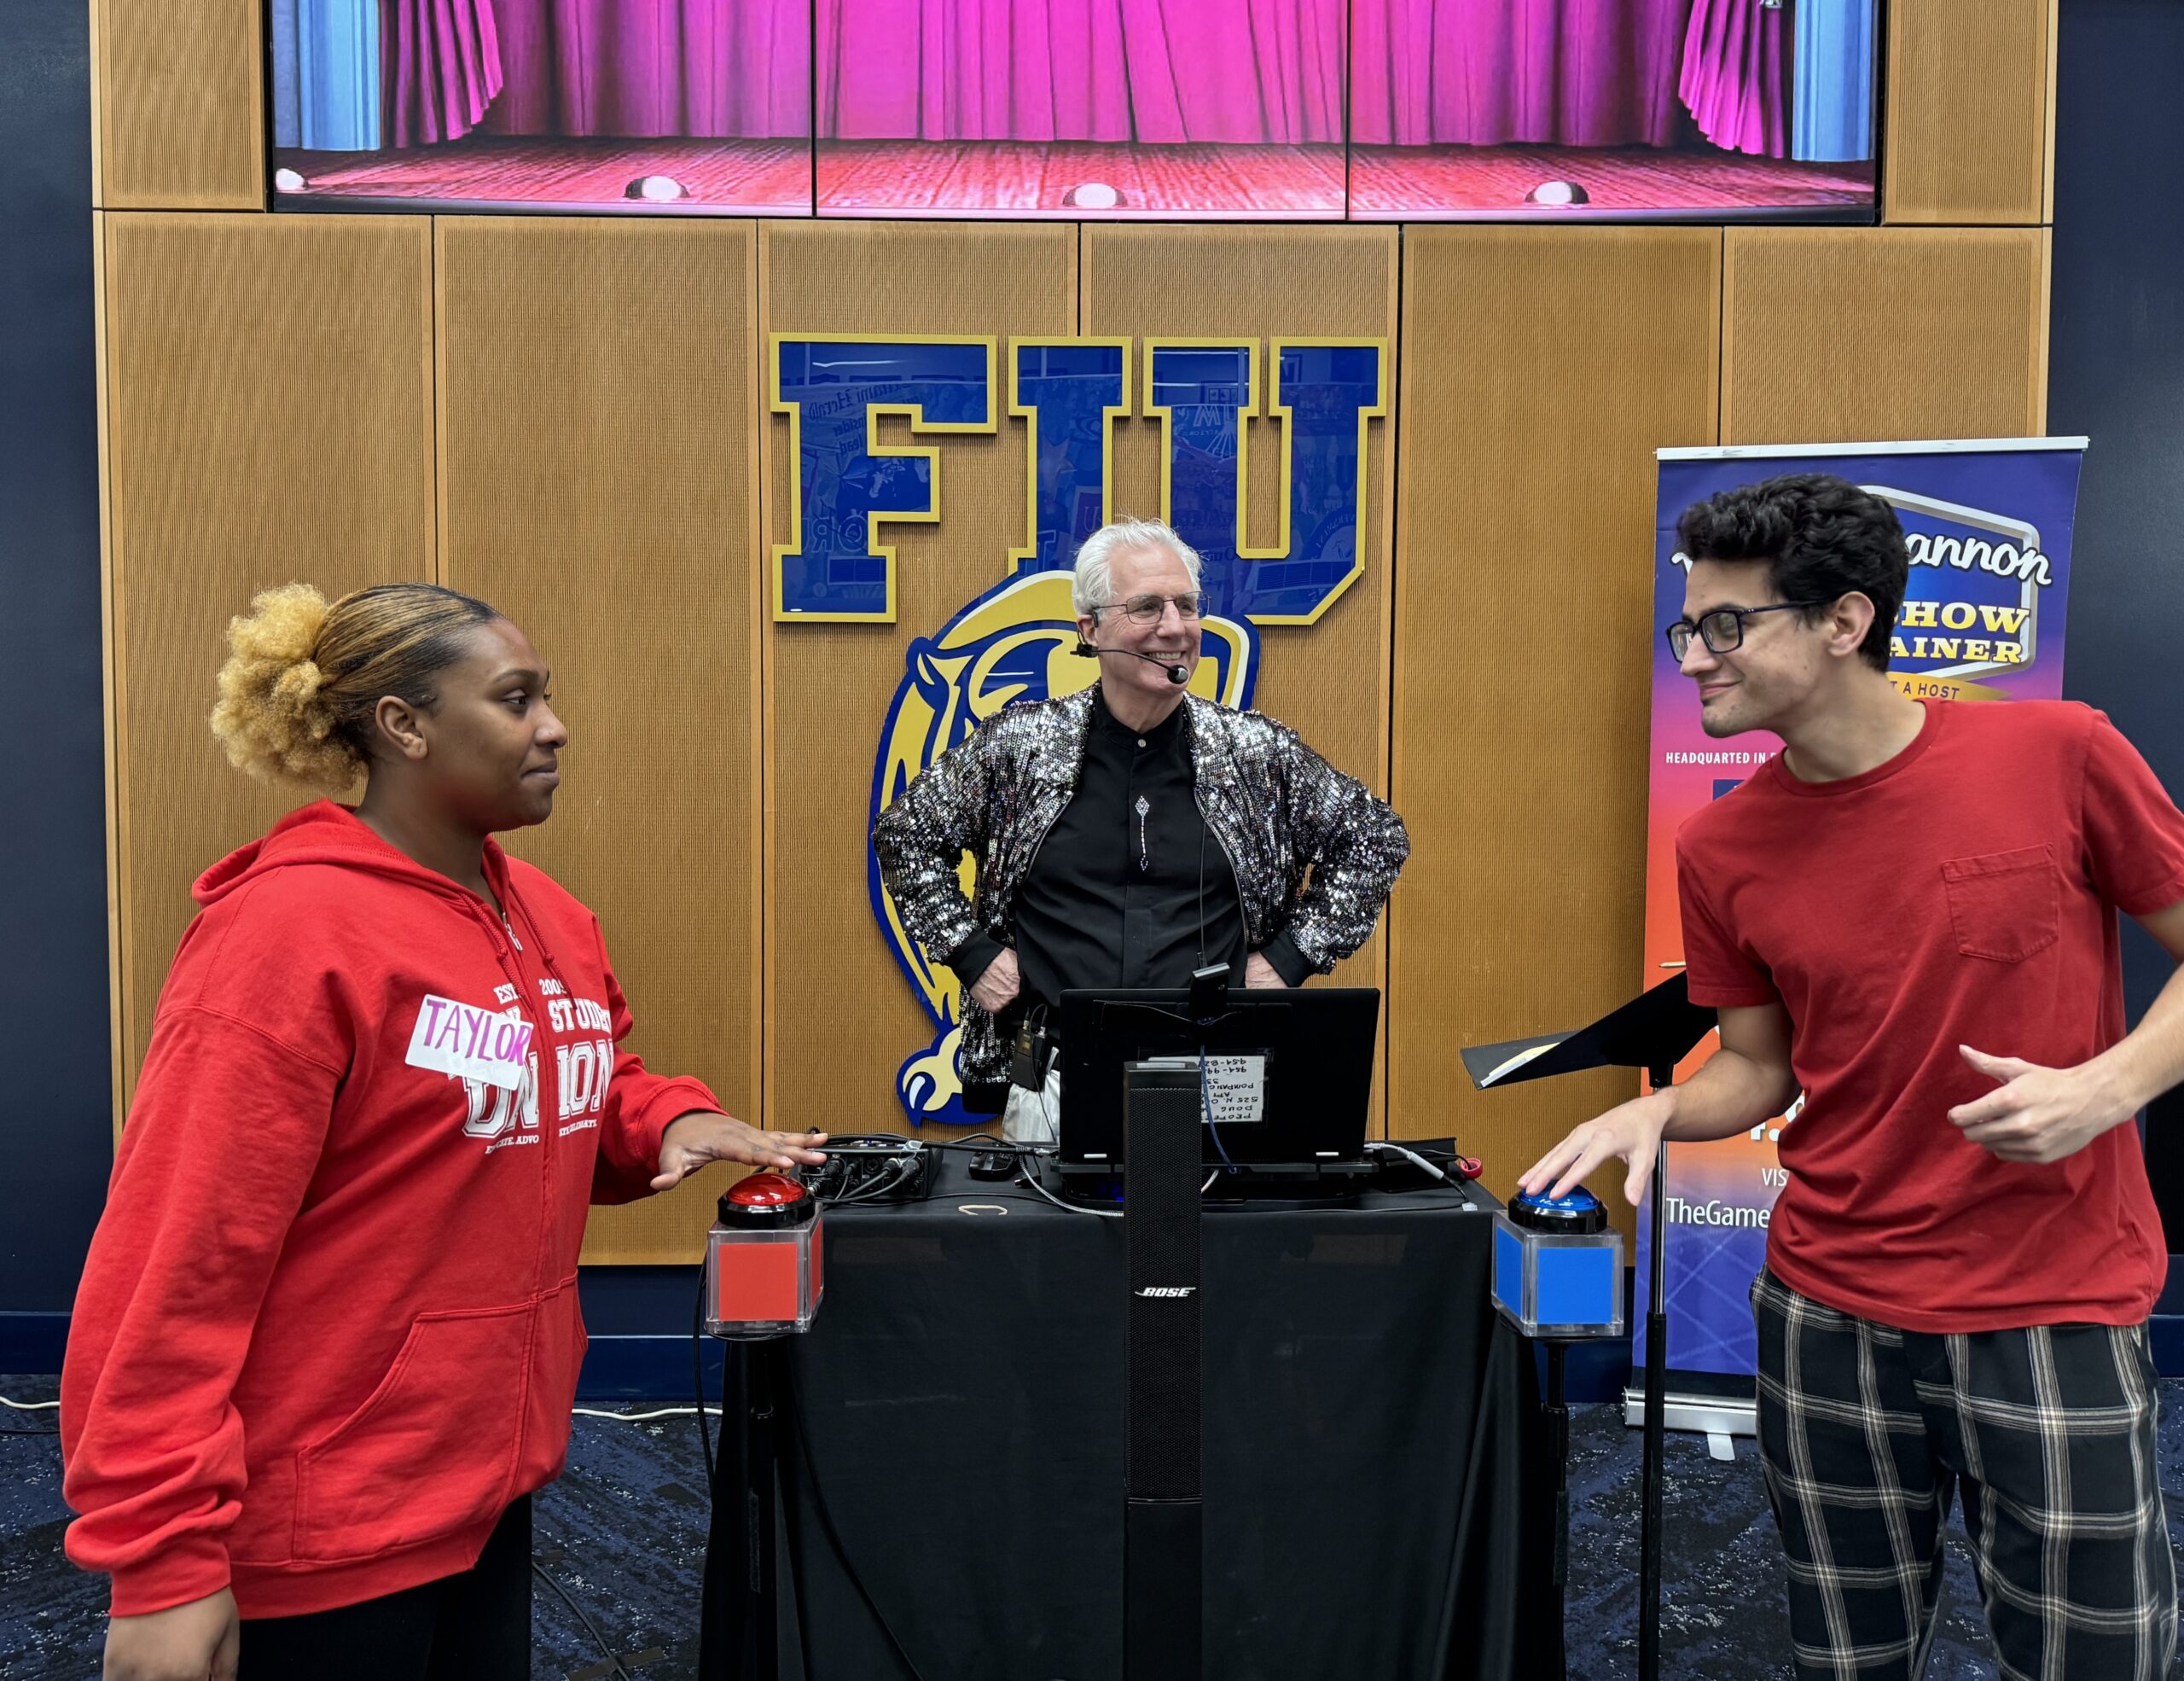 Doug Shannon's Team Feud - Game Show at FIU - students enjoying game